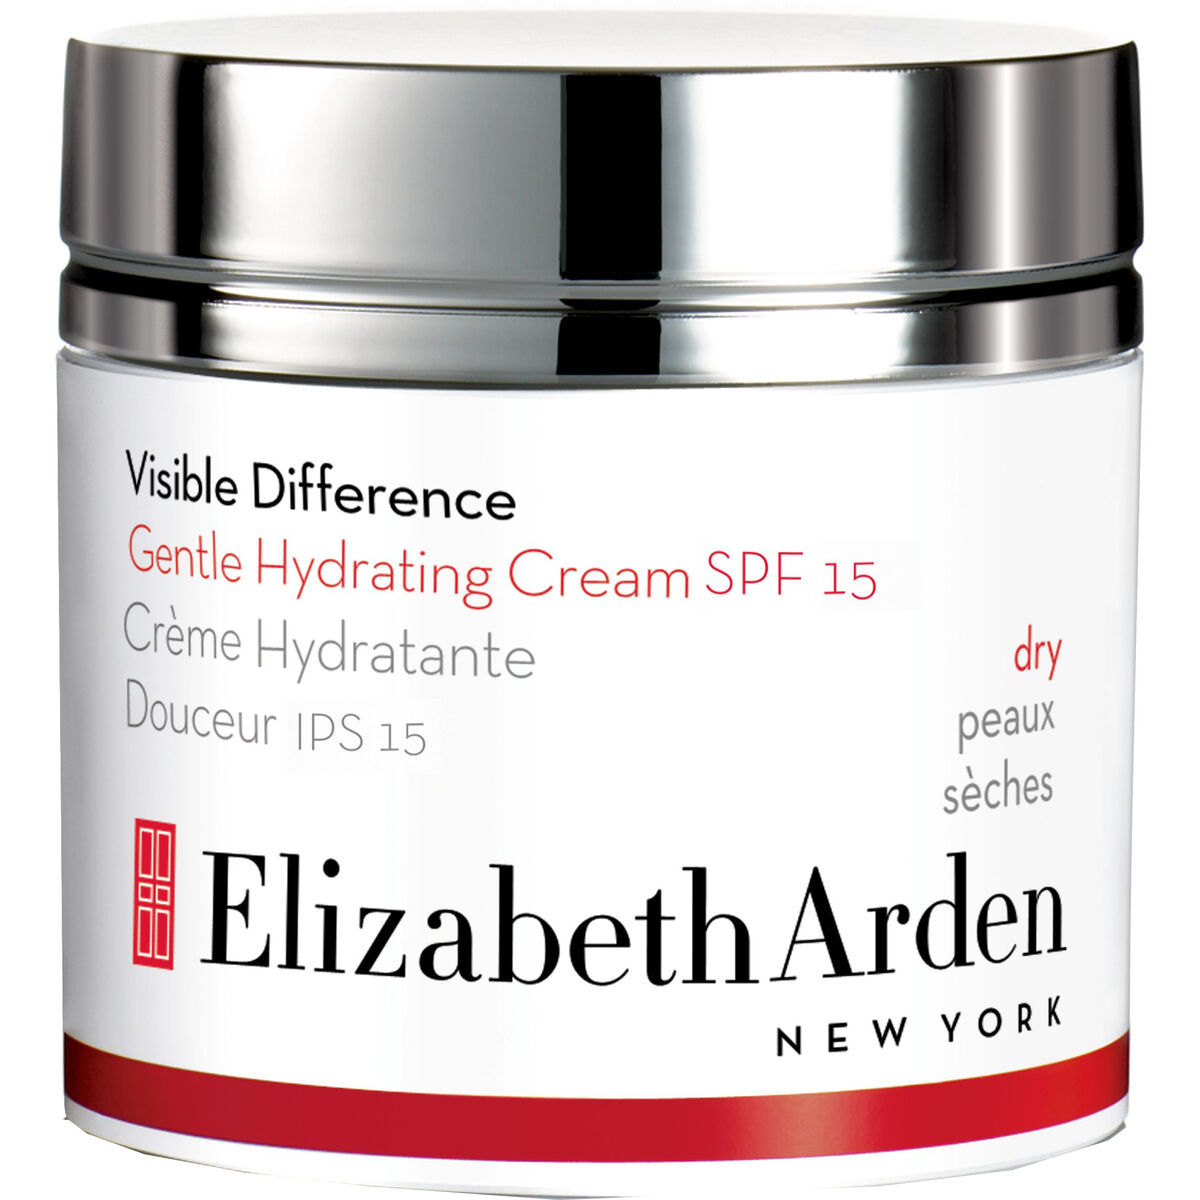 Elizabeth Arden Visible Difference Gentle Hydrating Cream SPF15 (oil free) - $97.00